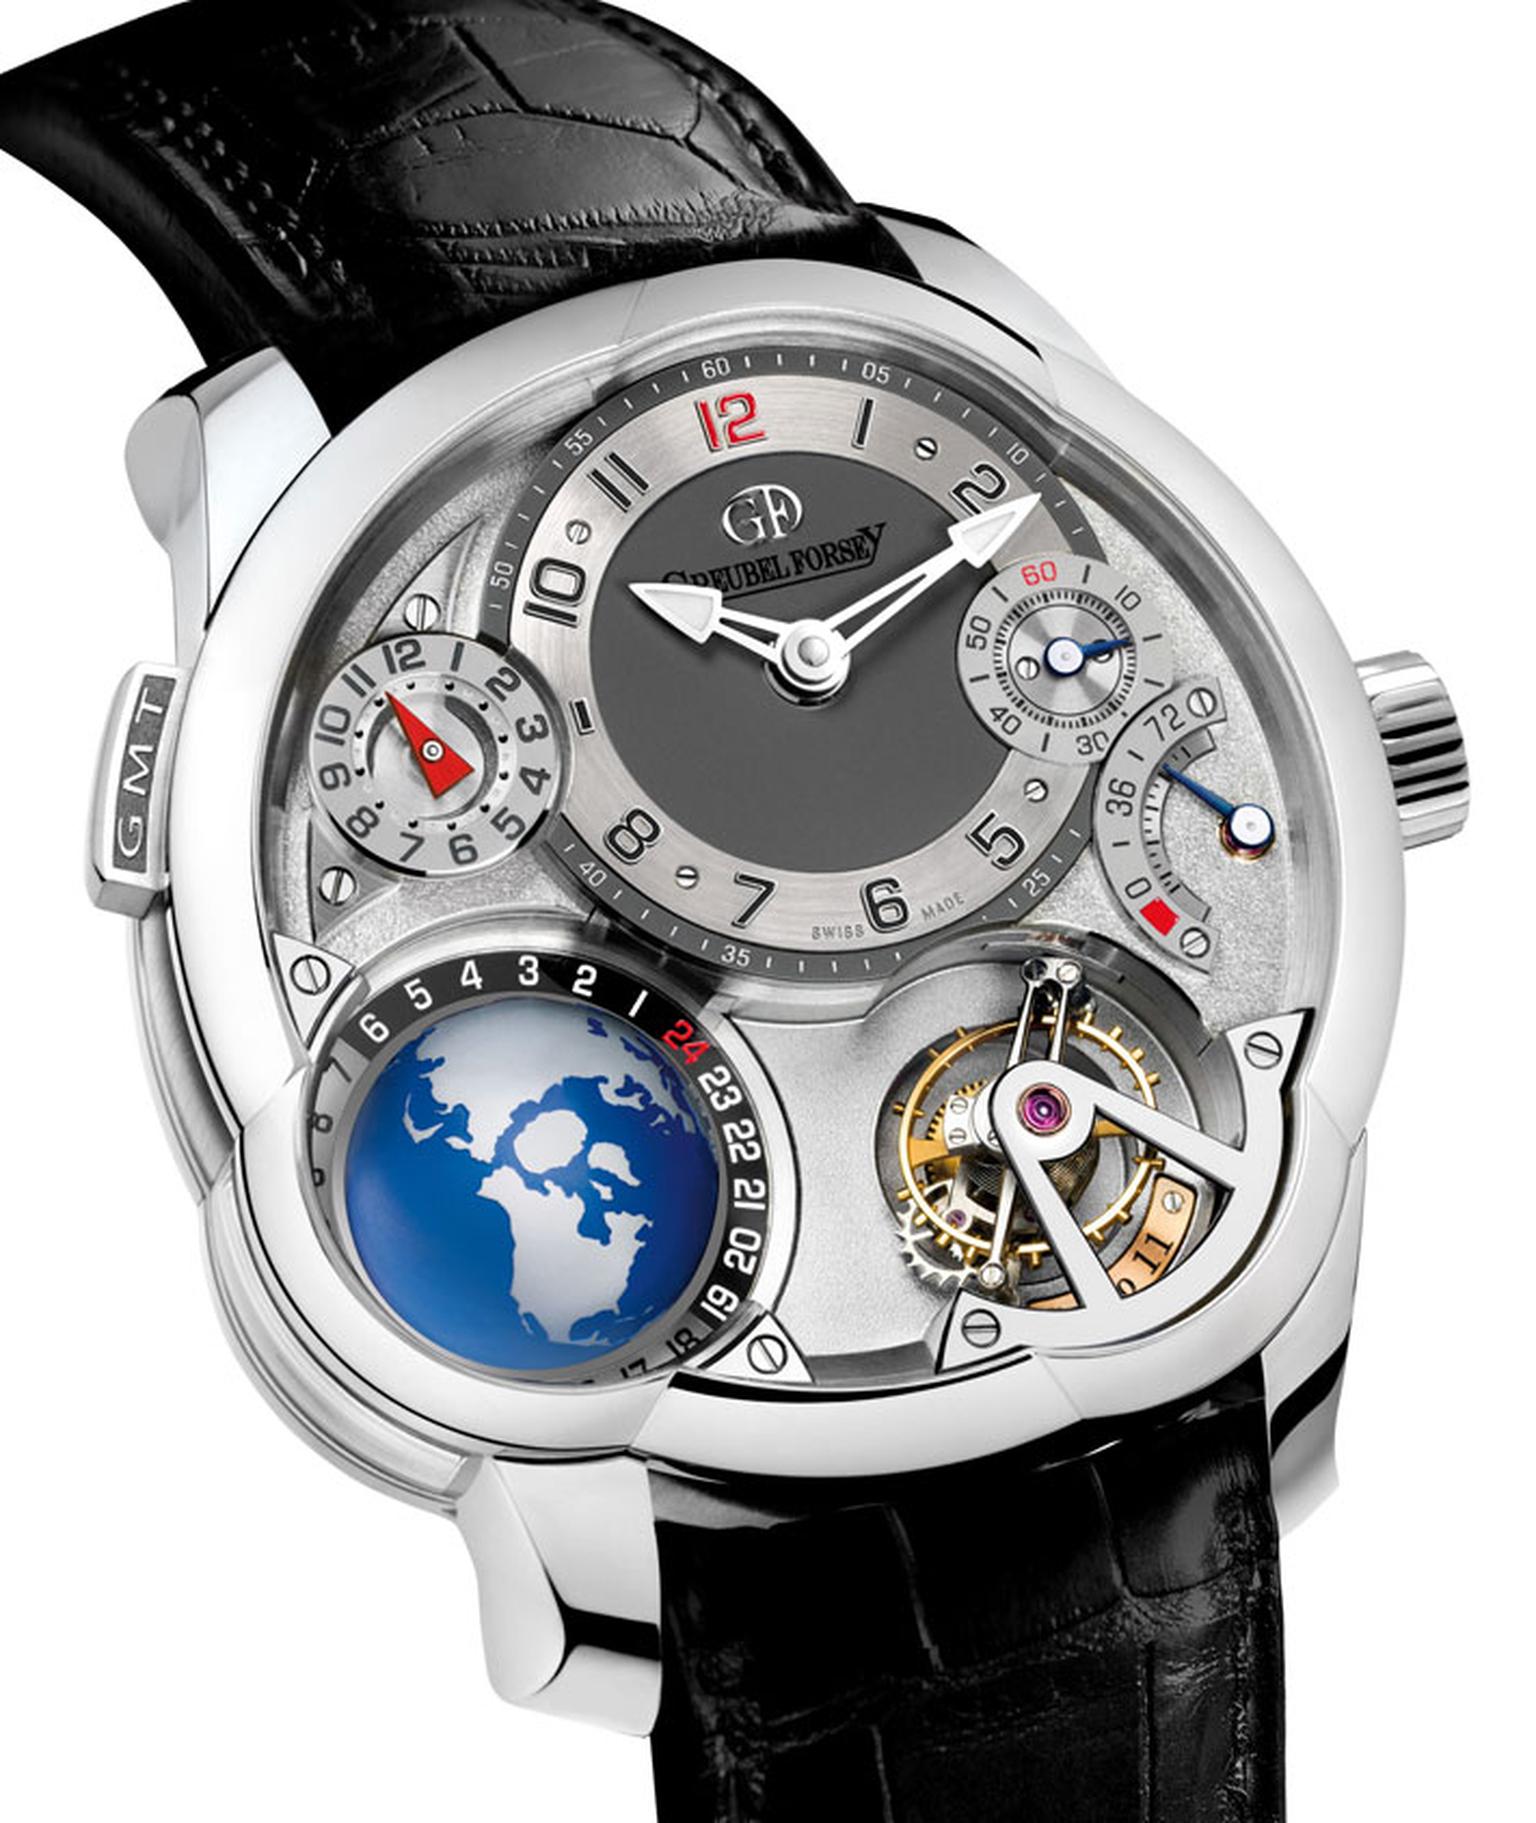 Greubel and Forsey Calibre GF05 watch in white gold and black alligatror strap. POA